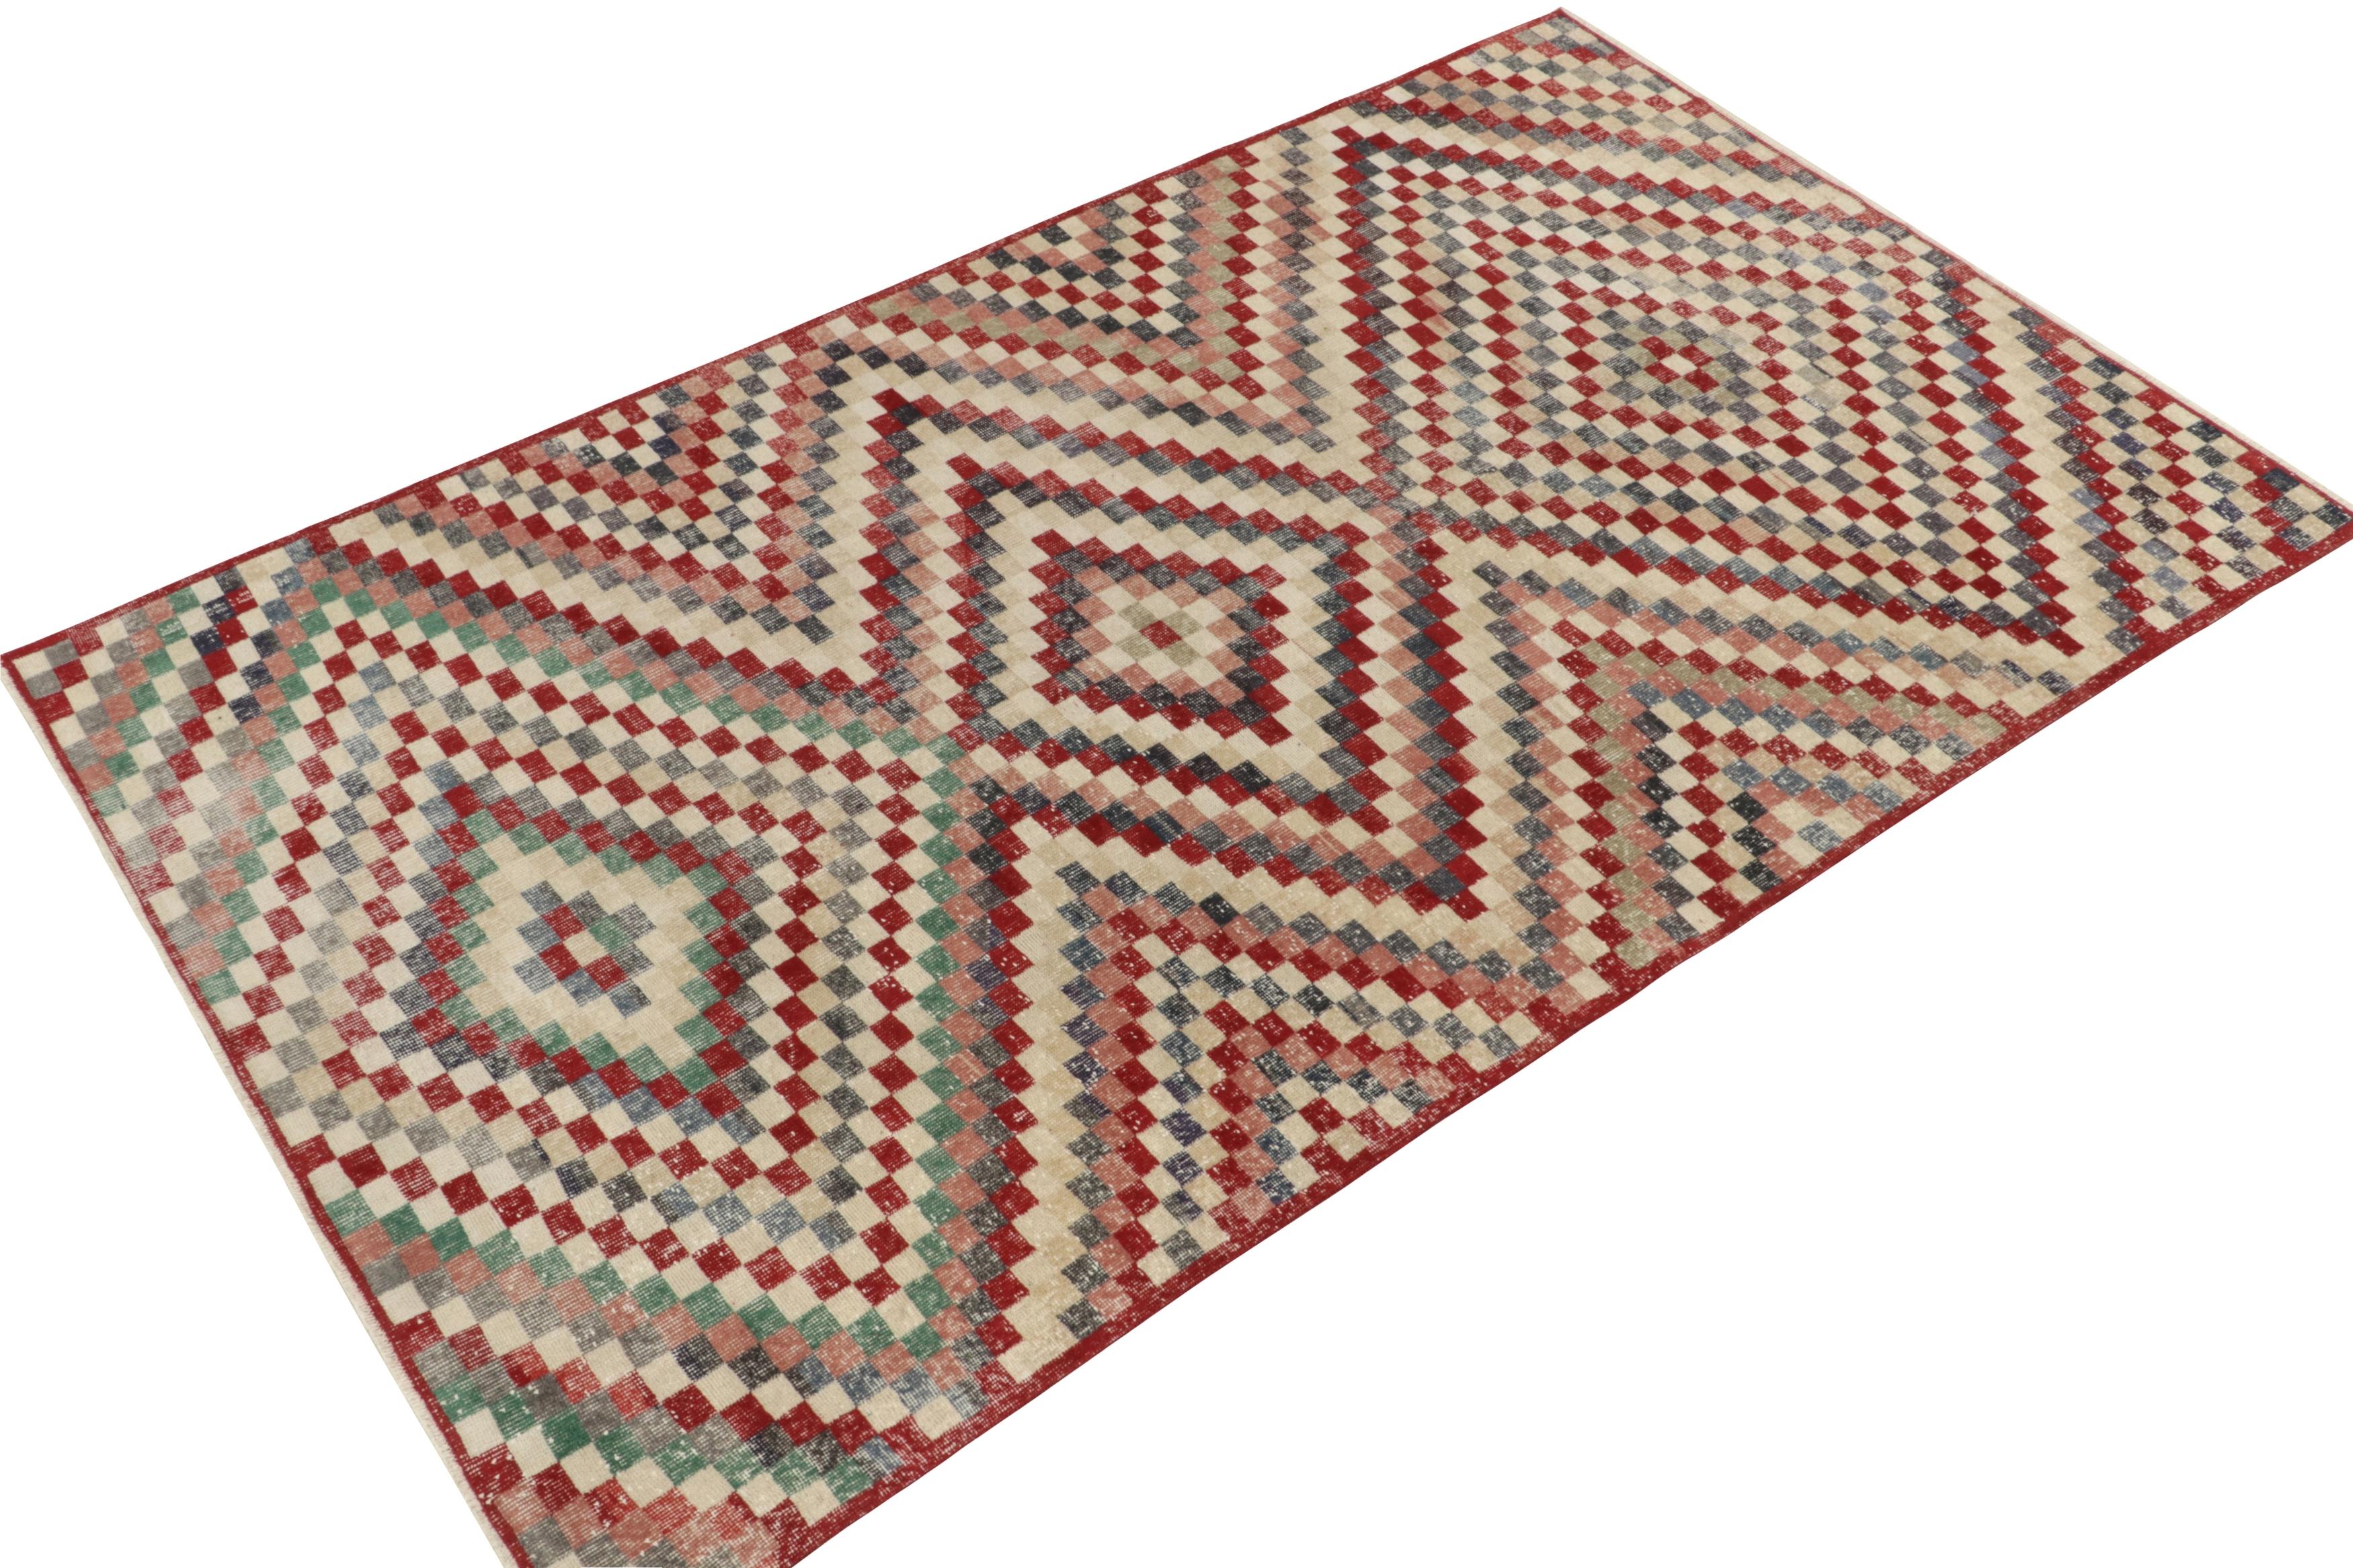 Hand-knotted in wool, a 6x10 vintage rug from a revered Turkish designer, entering Rug & Kilim’s commemorative Mid-Century Pasha Collection. 

This traditional spin enjoys a dextrous geometric pattern in variegated tones of red, blue, beige &